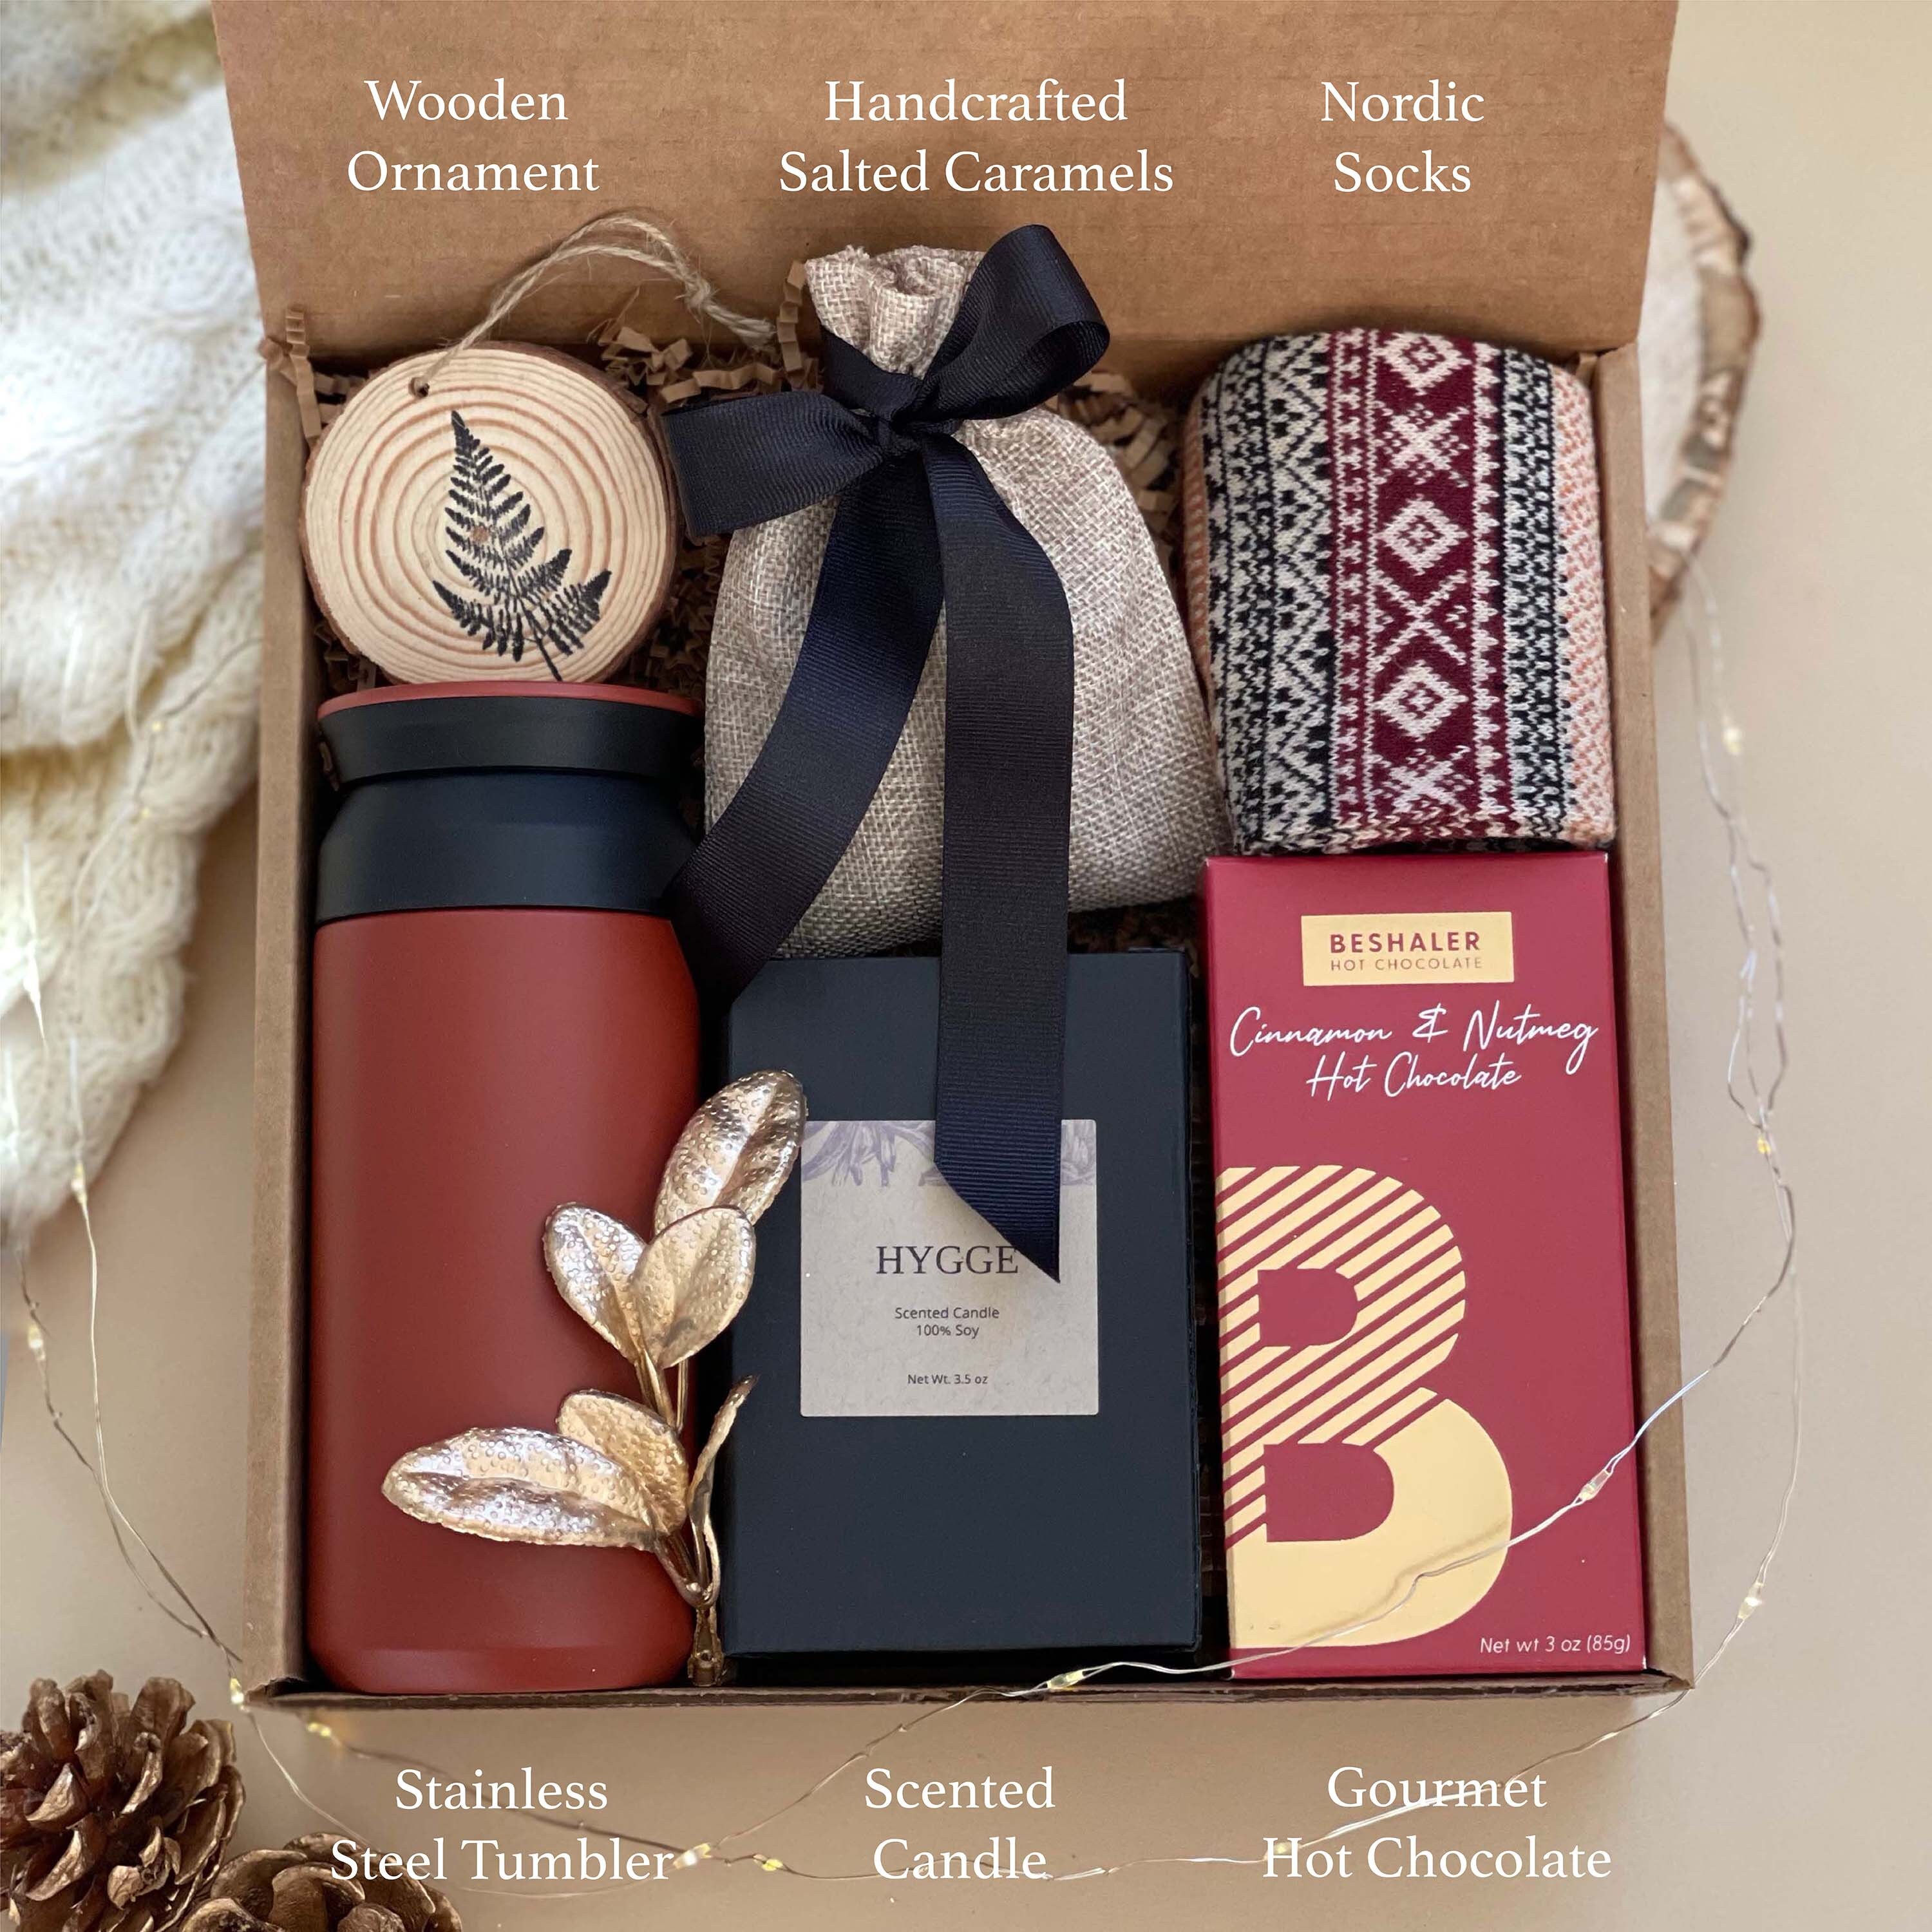 Baby & New Mom Gift Ideas for Christmas - Healthy By Heather Brown